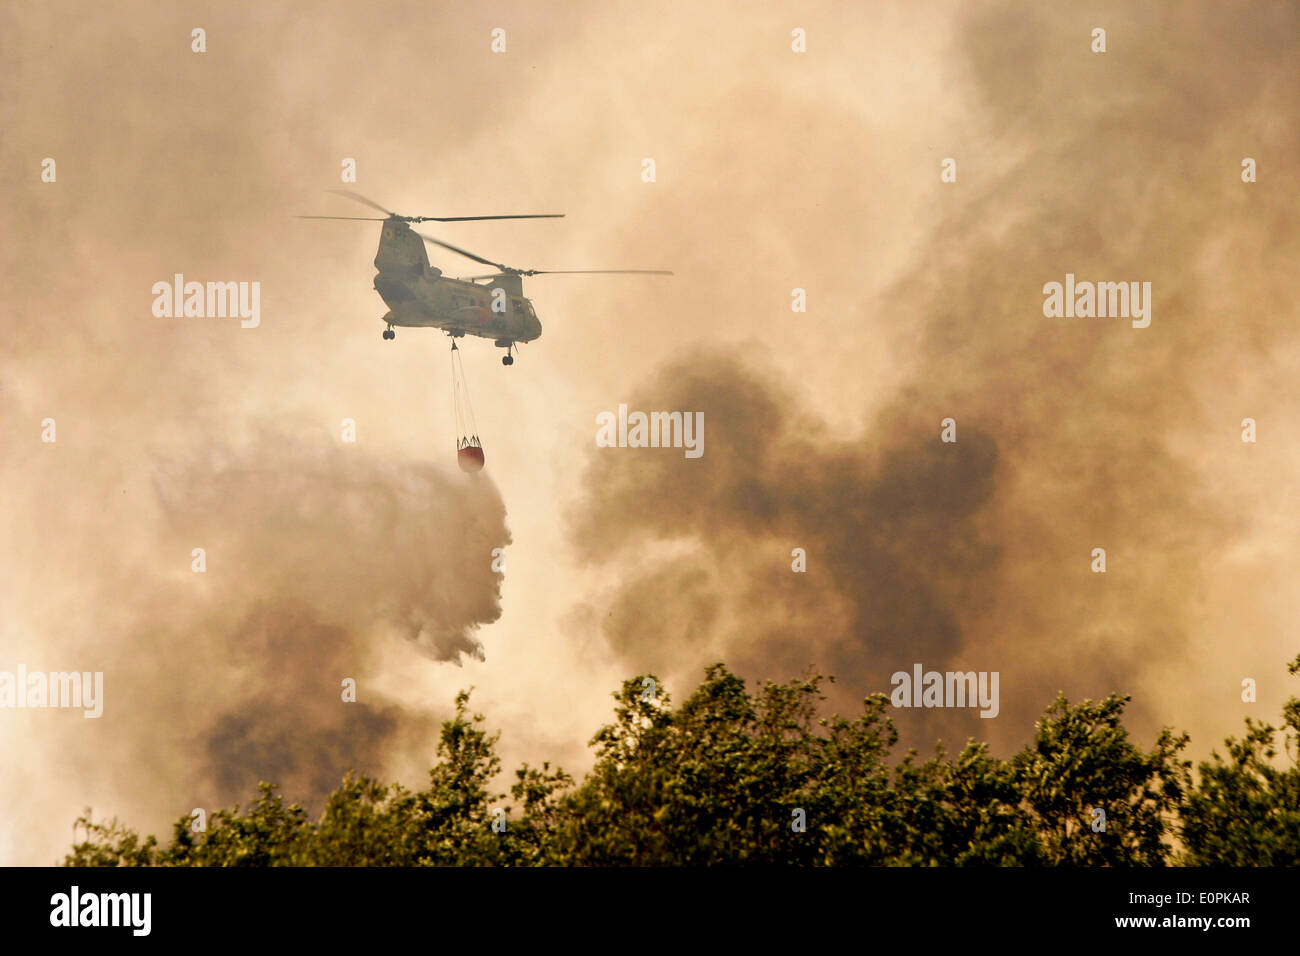 A US Marine Corps helicopter carries water into a Bambi bucket to help fight the Tomahawk and Las Pulgas wildfires as they burn the foothills May 16, 2014 around Camp Pendleton, California.  Evacuations forced more than 13,000 people from their homes as the fire burned across San Diego County. Stock Photo